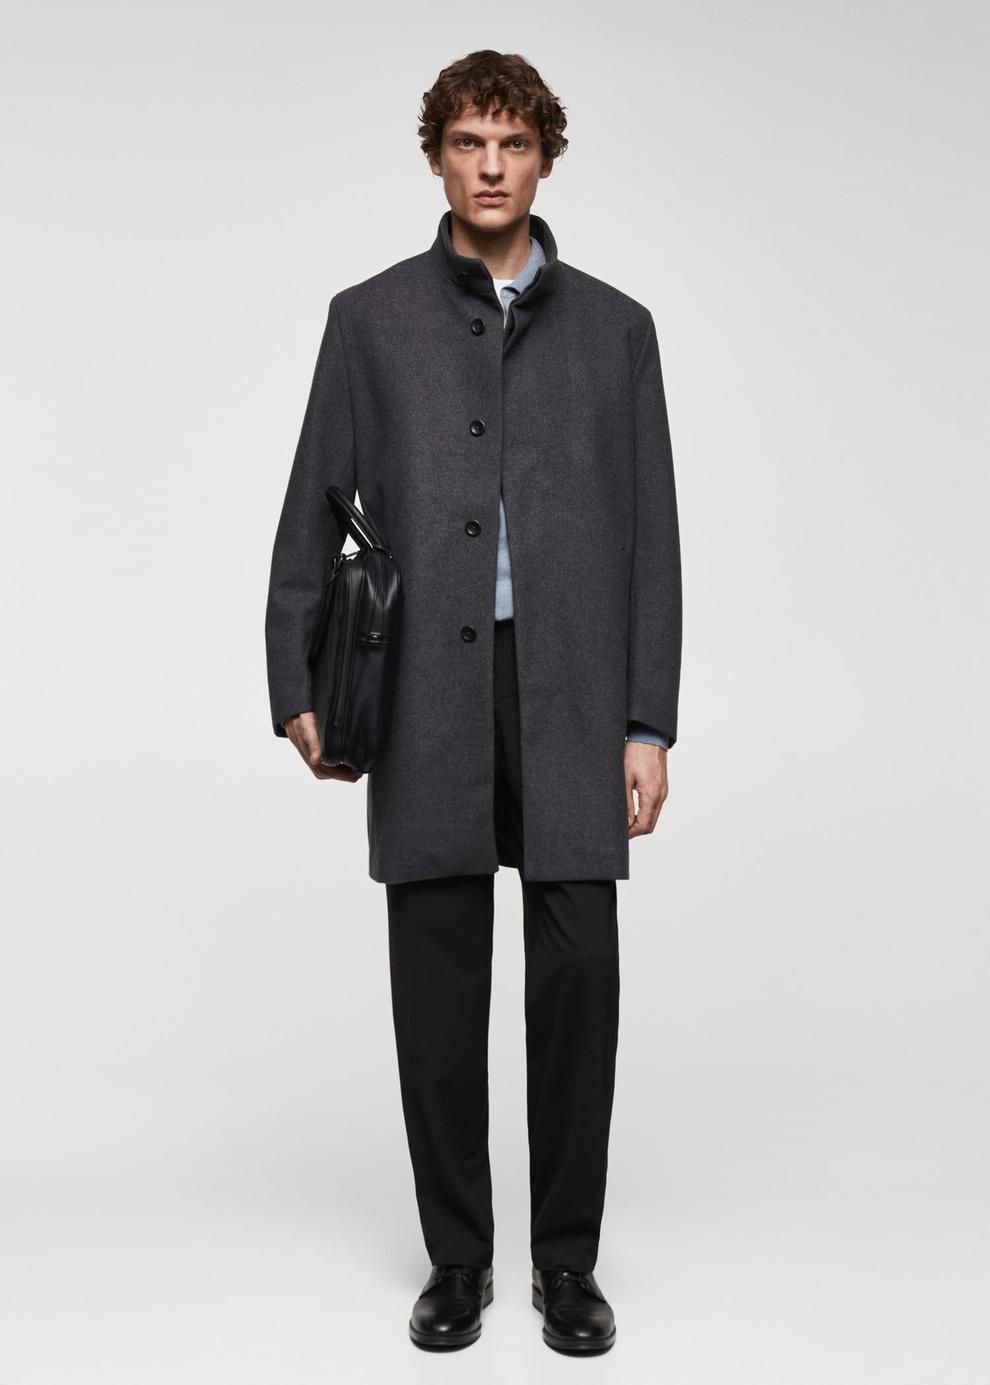 Wool funnel neck coat offers at S$ 199.9 in HE by Mango